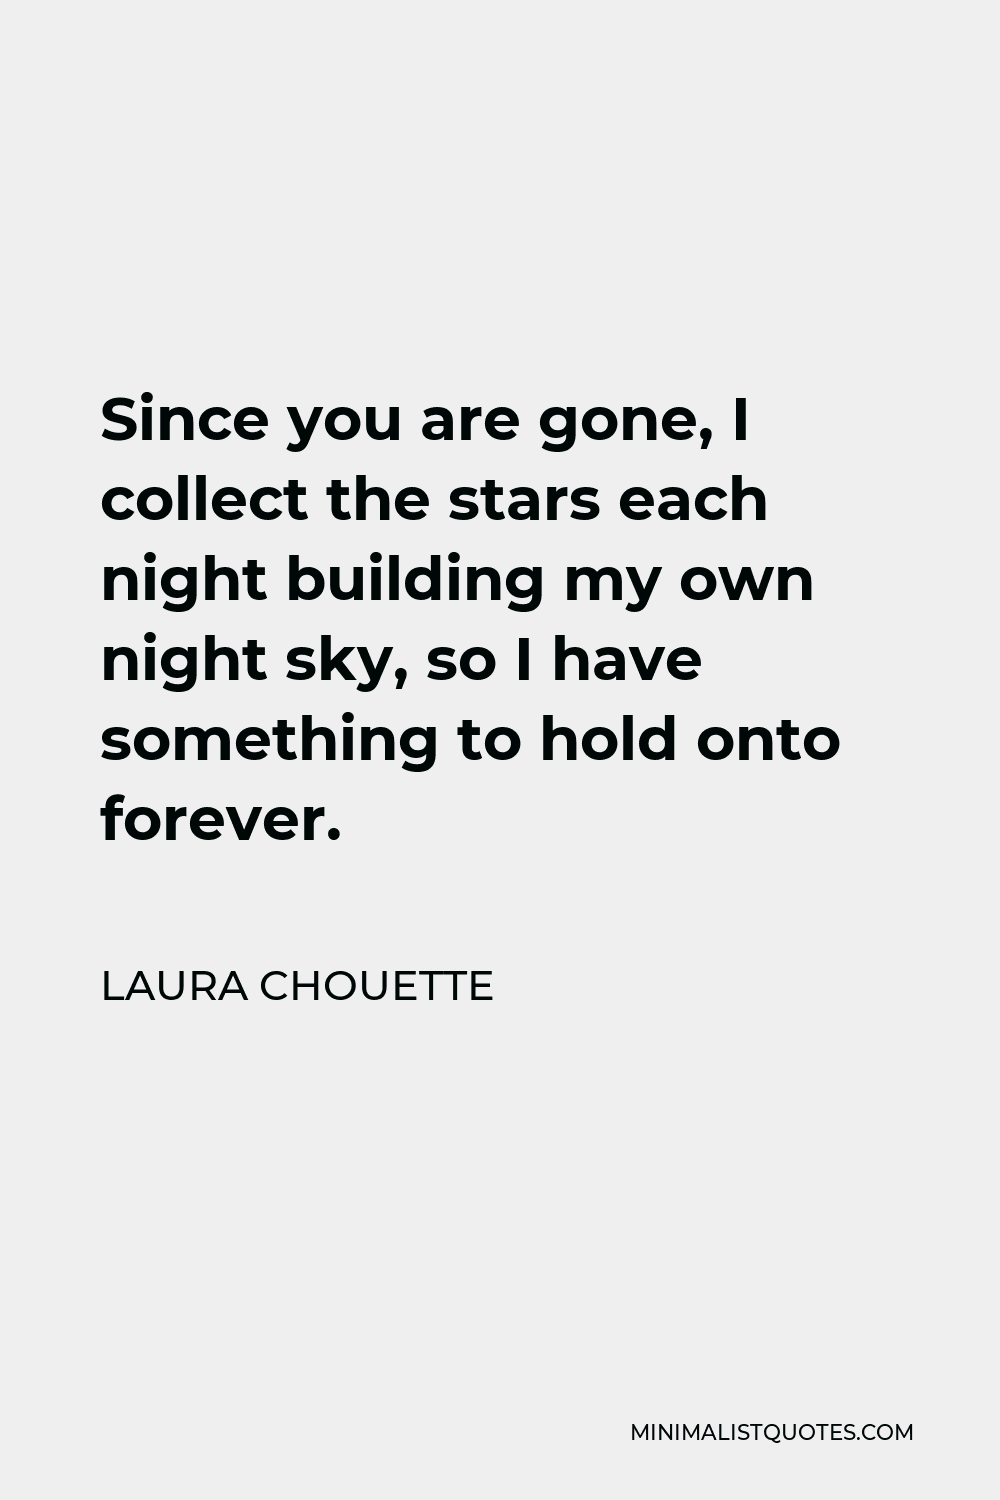 Laura Chouette Quote - Since you are gone, I collect the stars each night building my own night sky, so I have something to hold onto forever.